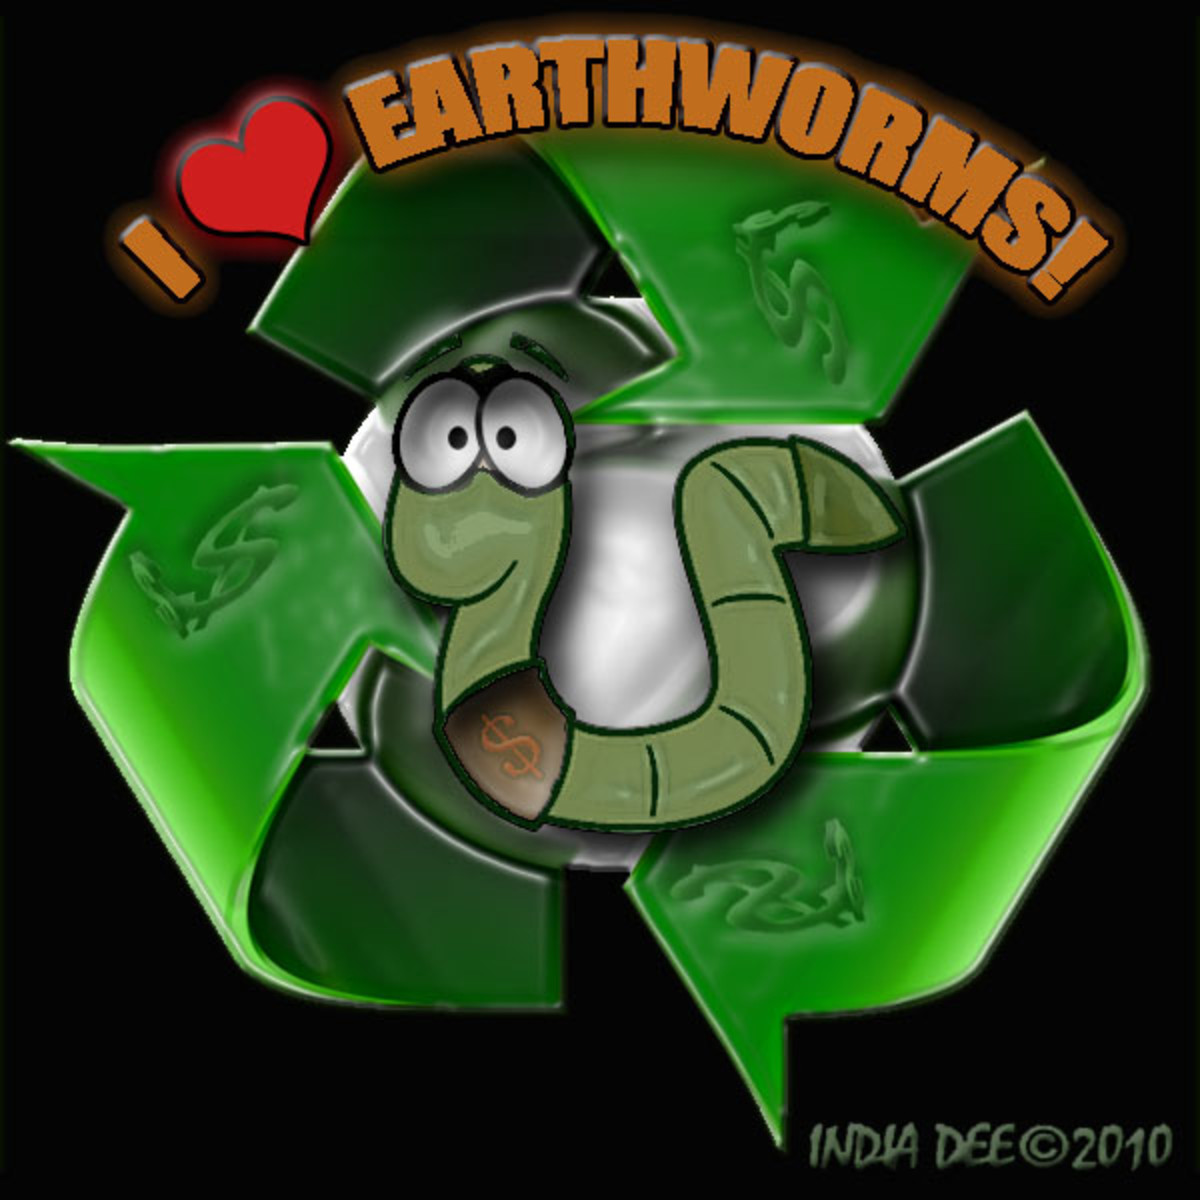 Learn how to professionally pack and ship earthworms.